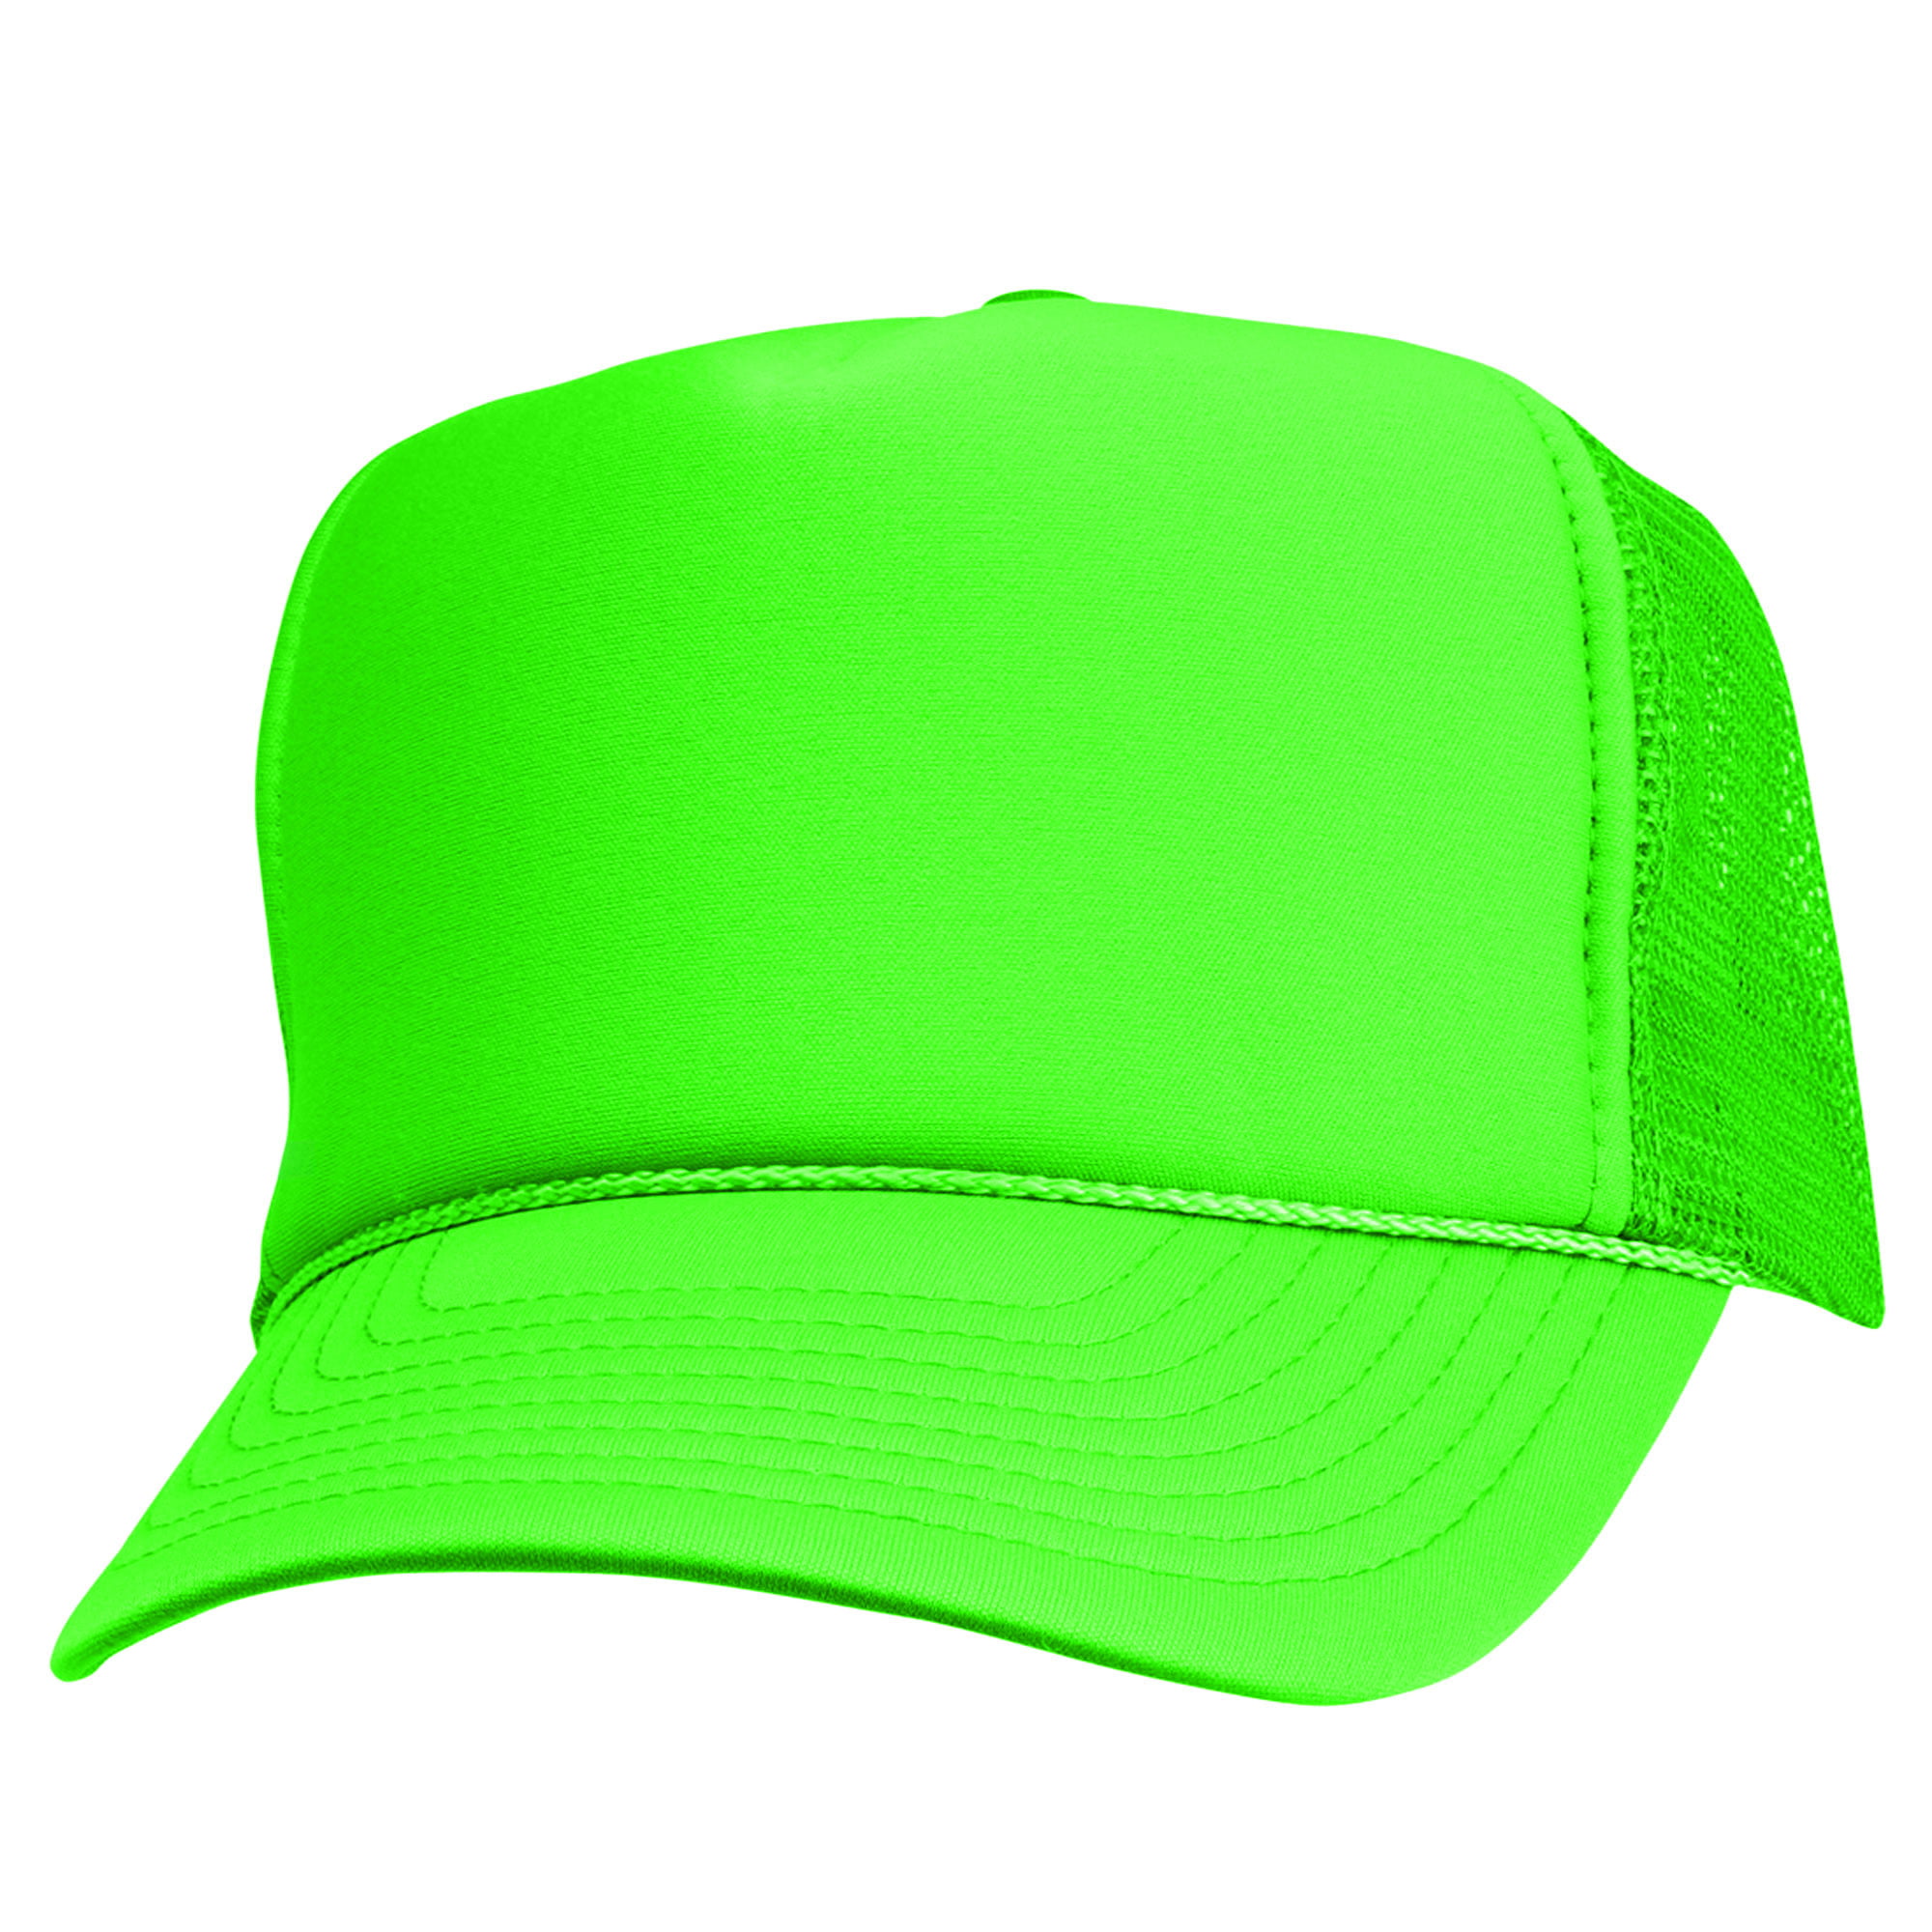 New Reflective Cap Safety Hat Neon Running Biker High Visibility Neon Lime Cap 